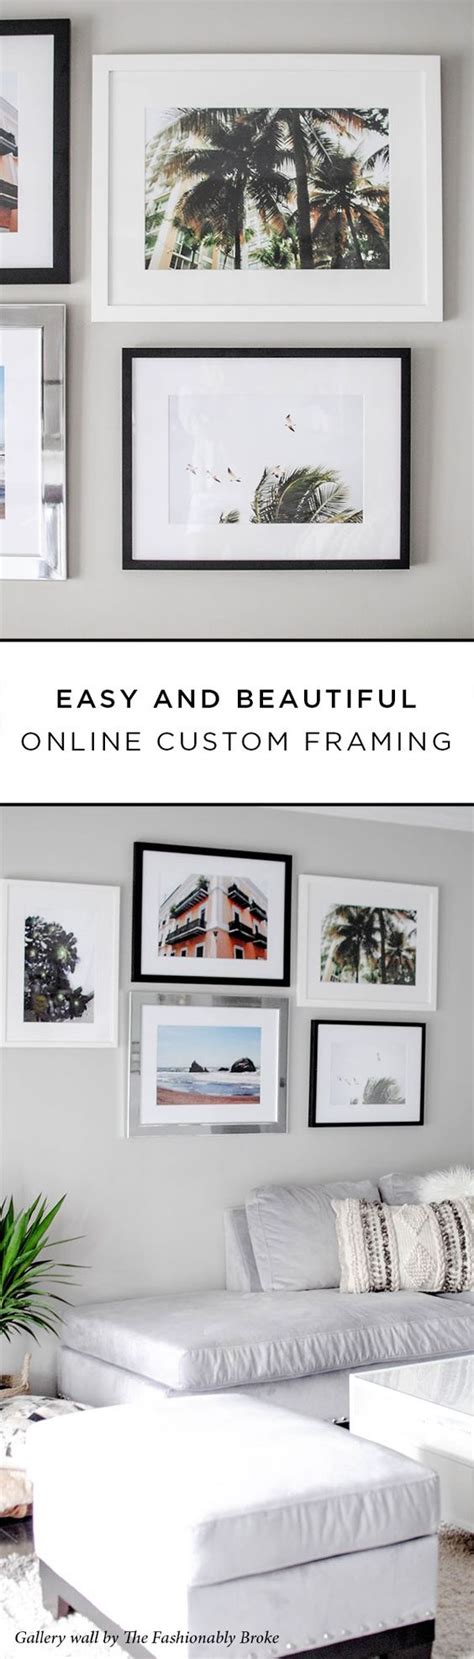 Framebridge Makes It Easy To Update Your Home With The Art And